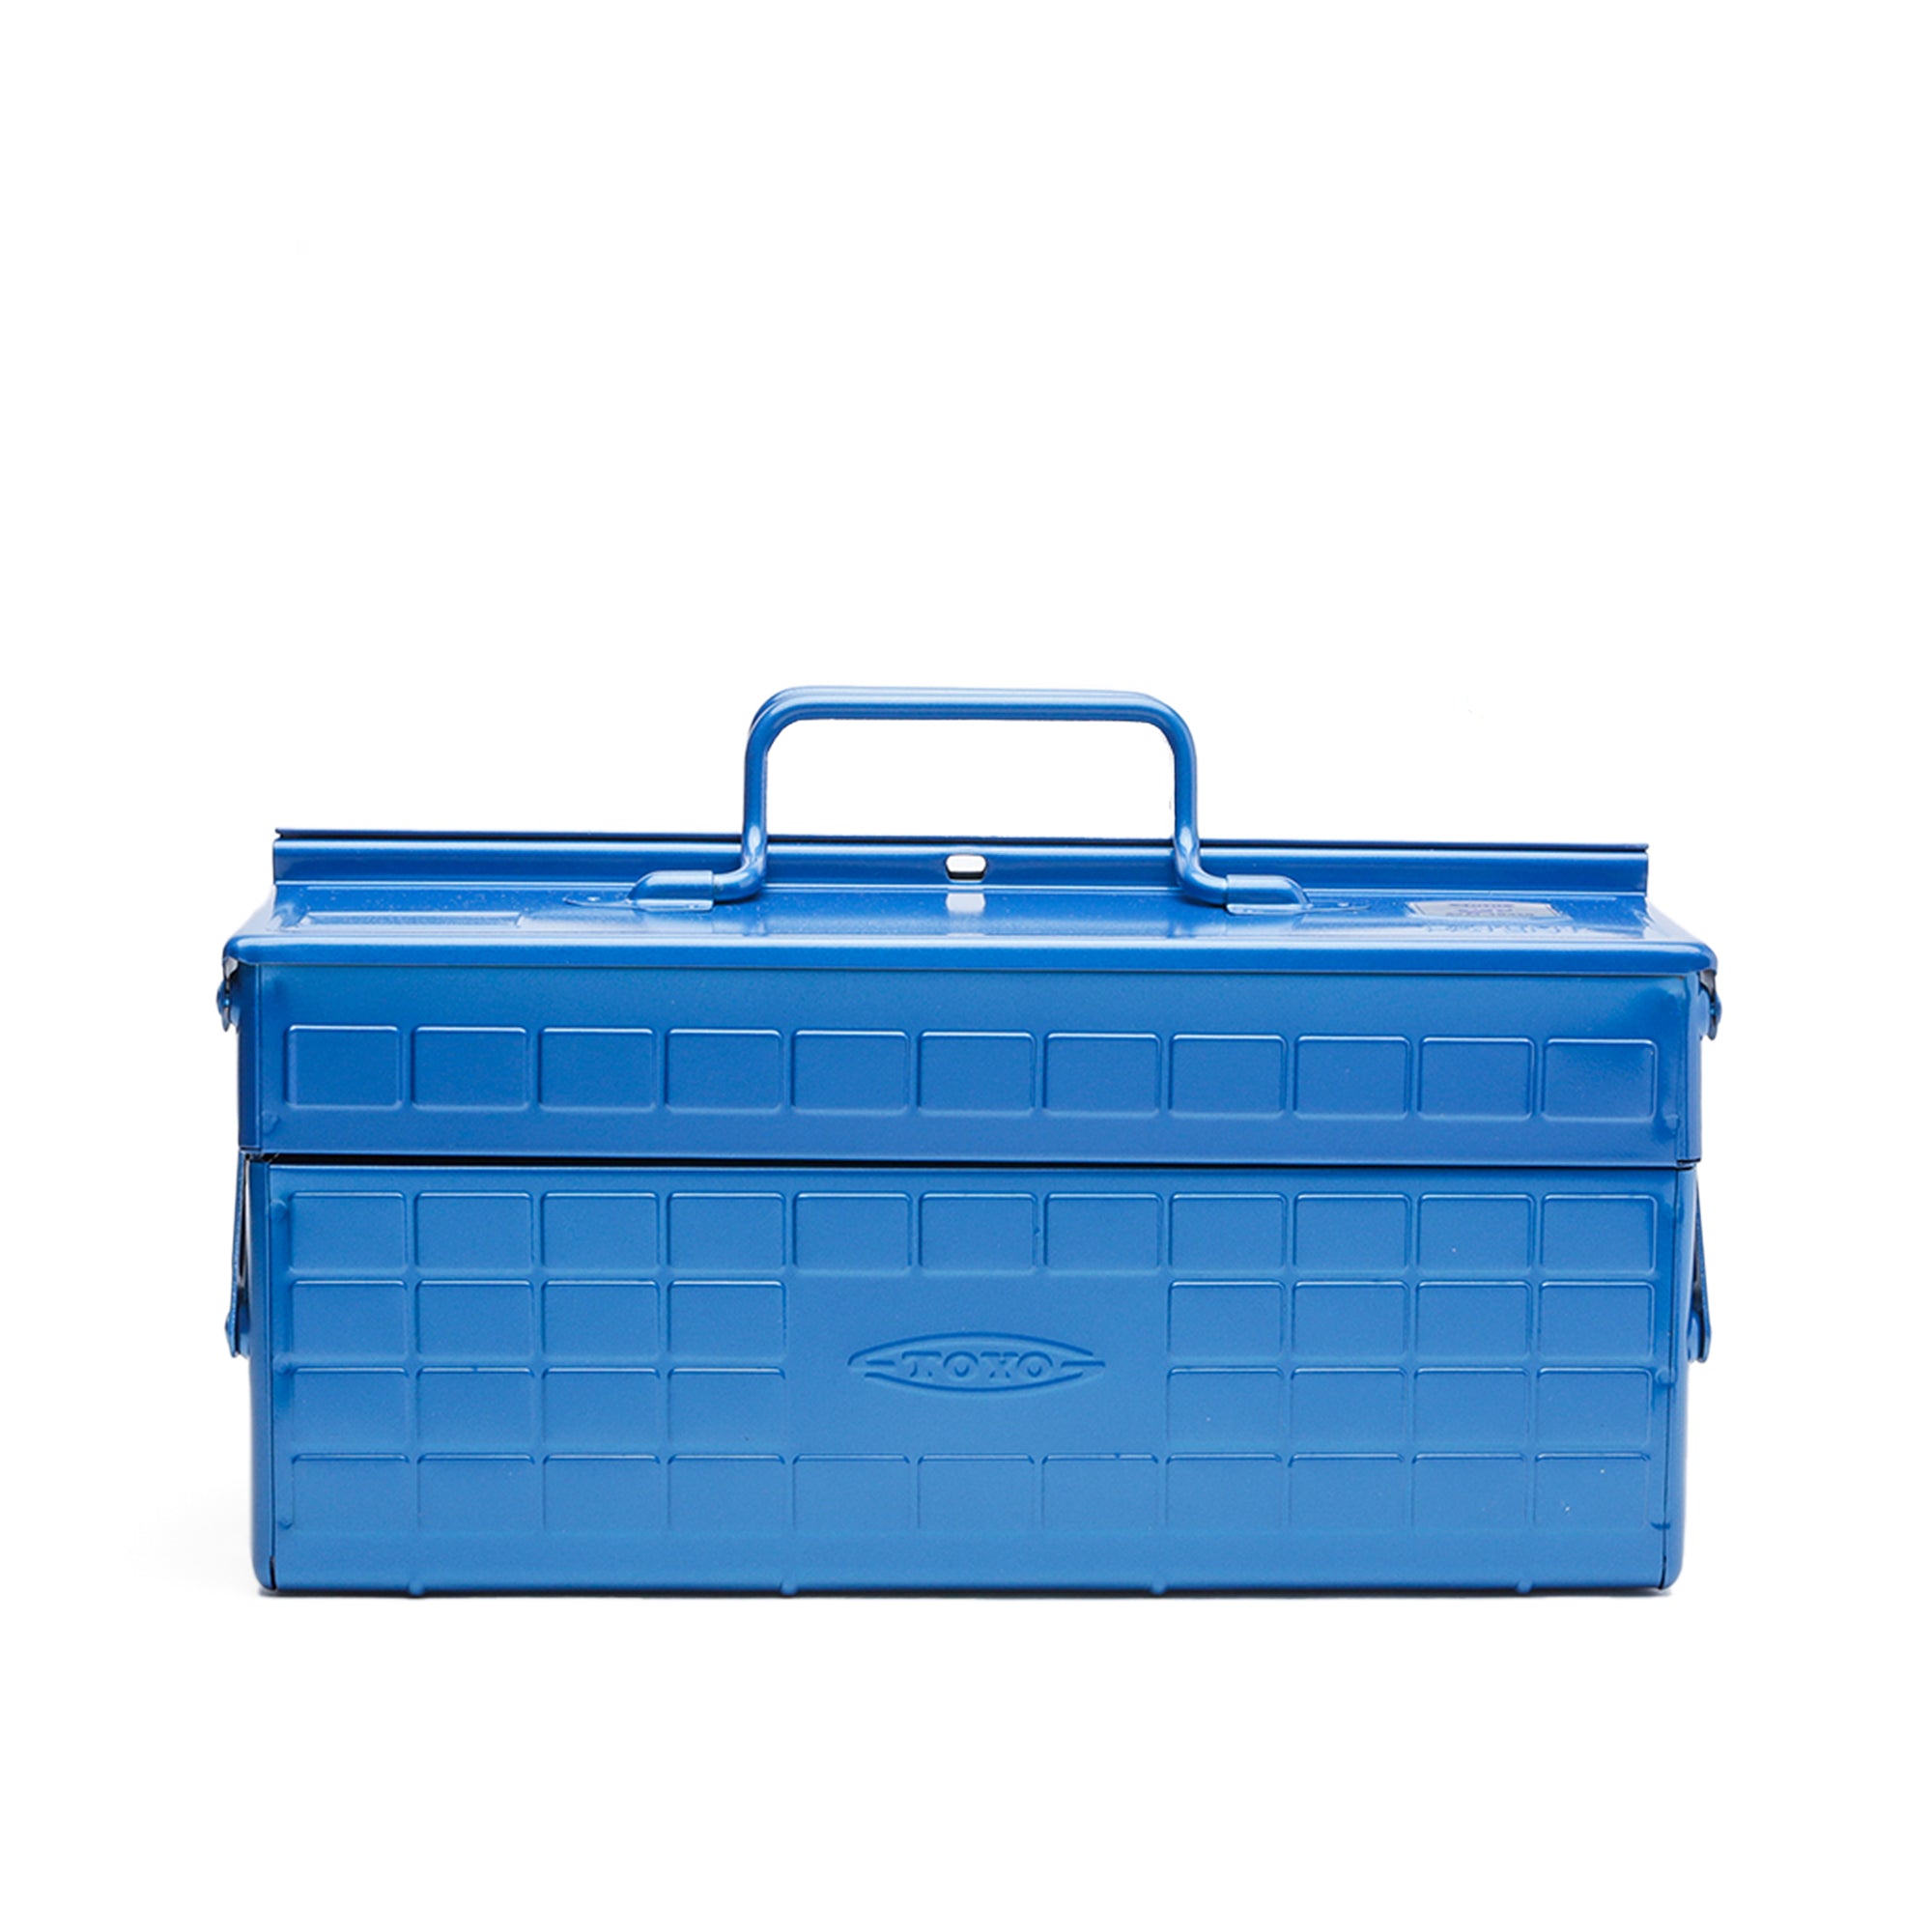 Blue Toyo Steel Toolbox | Cantilever Lid | Upper Storage Trays, Style ST-350